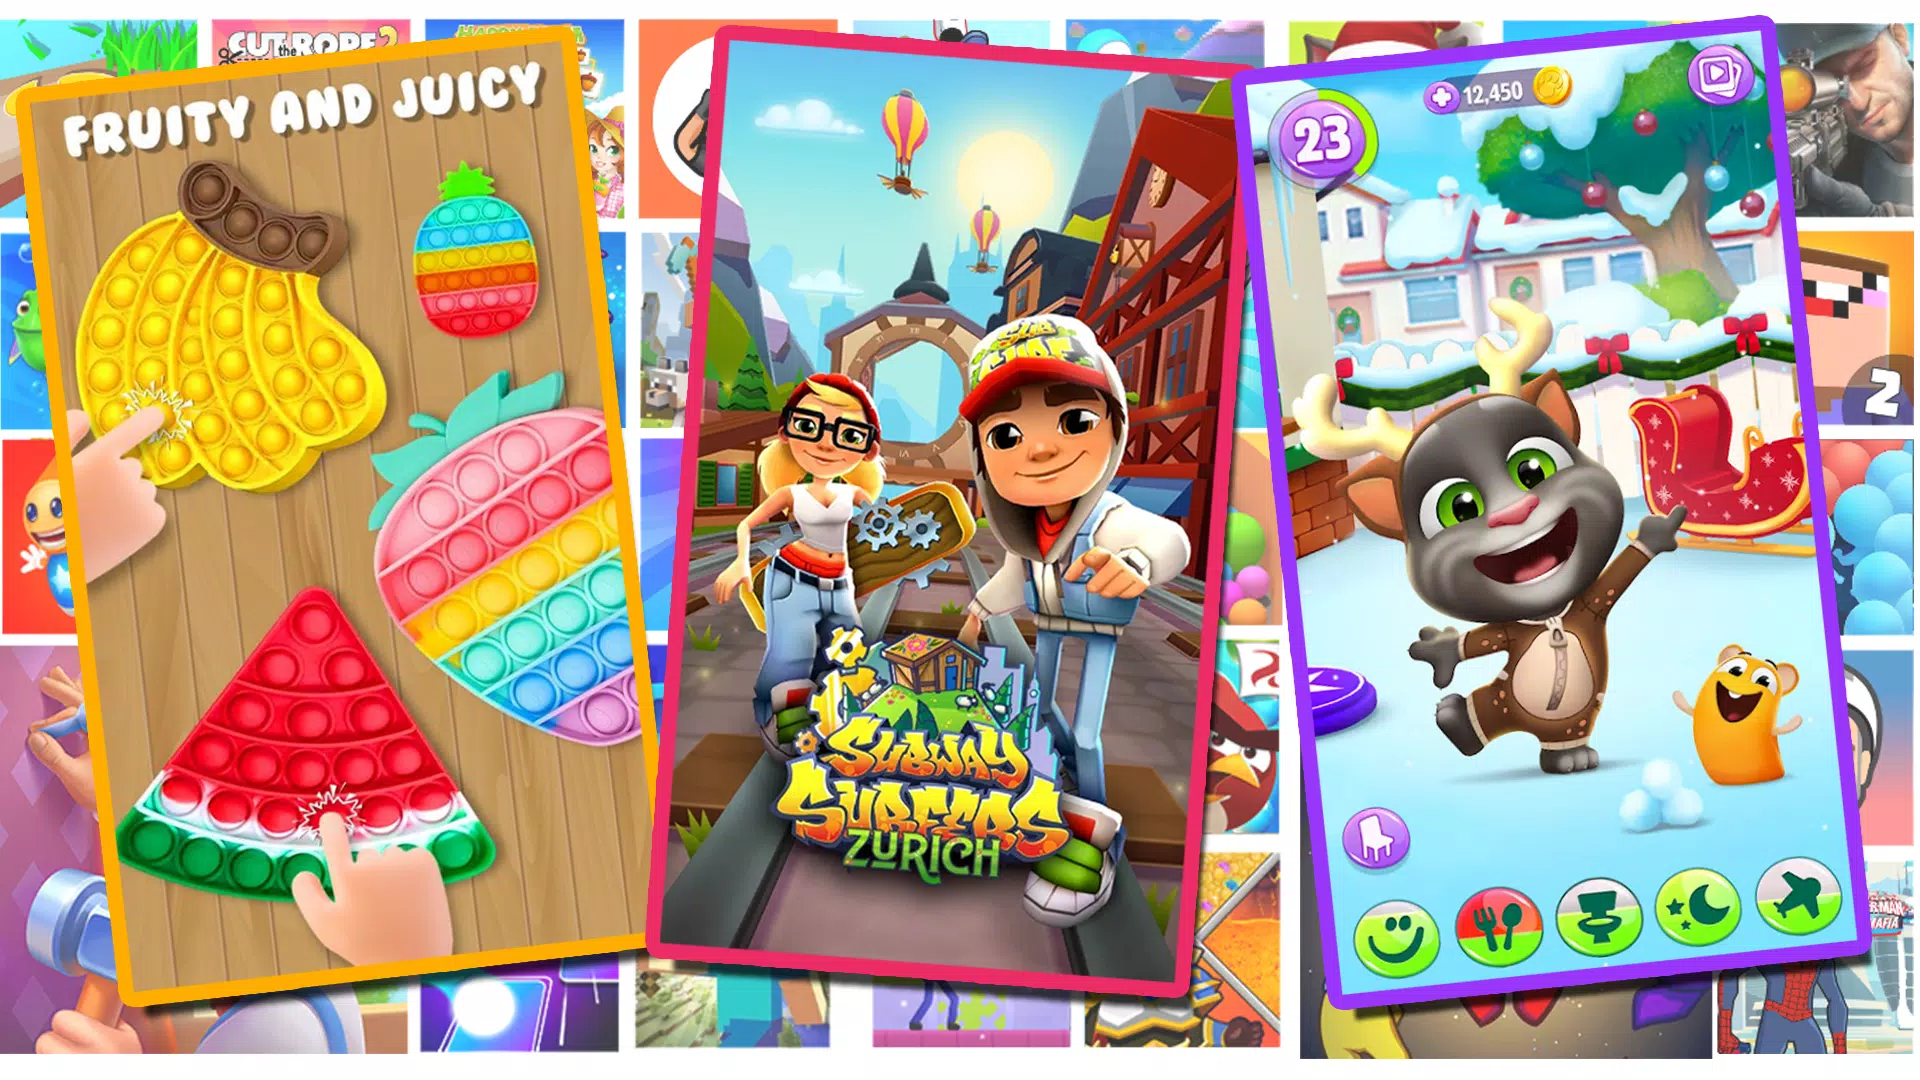 Stream How to install Subway Surfers Zurich APK on your Android